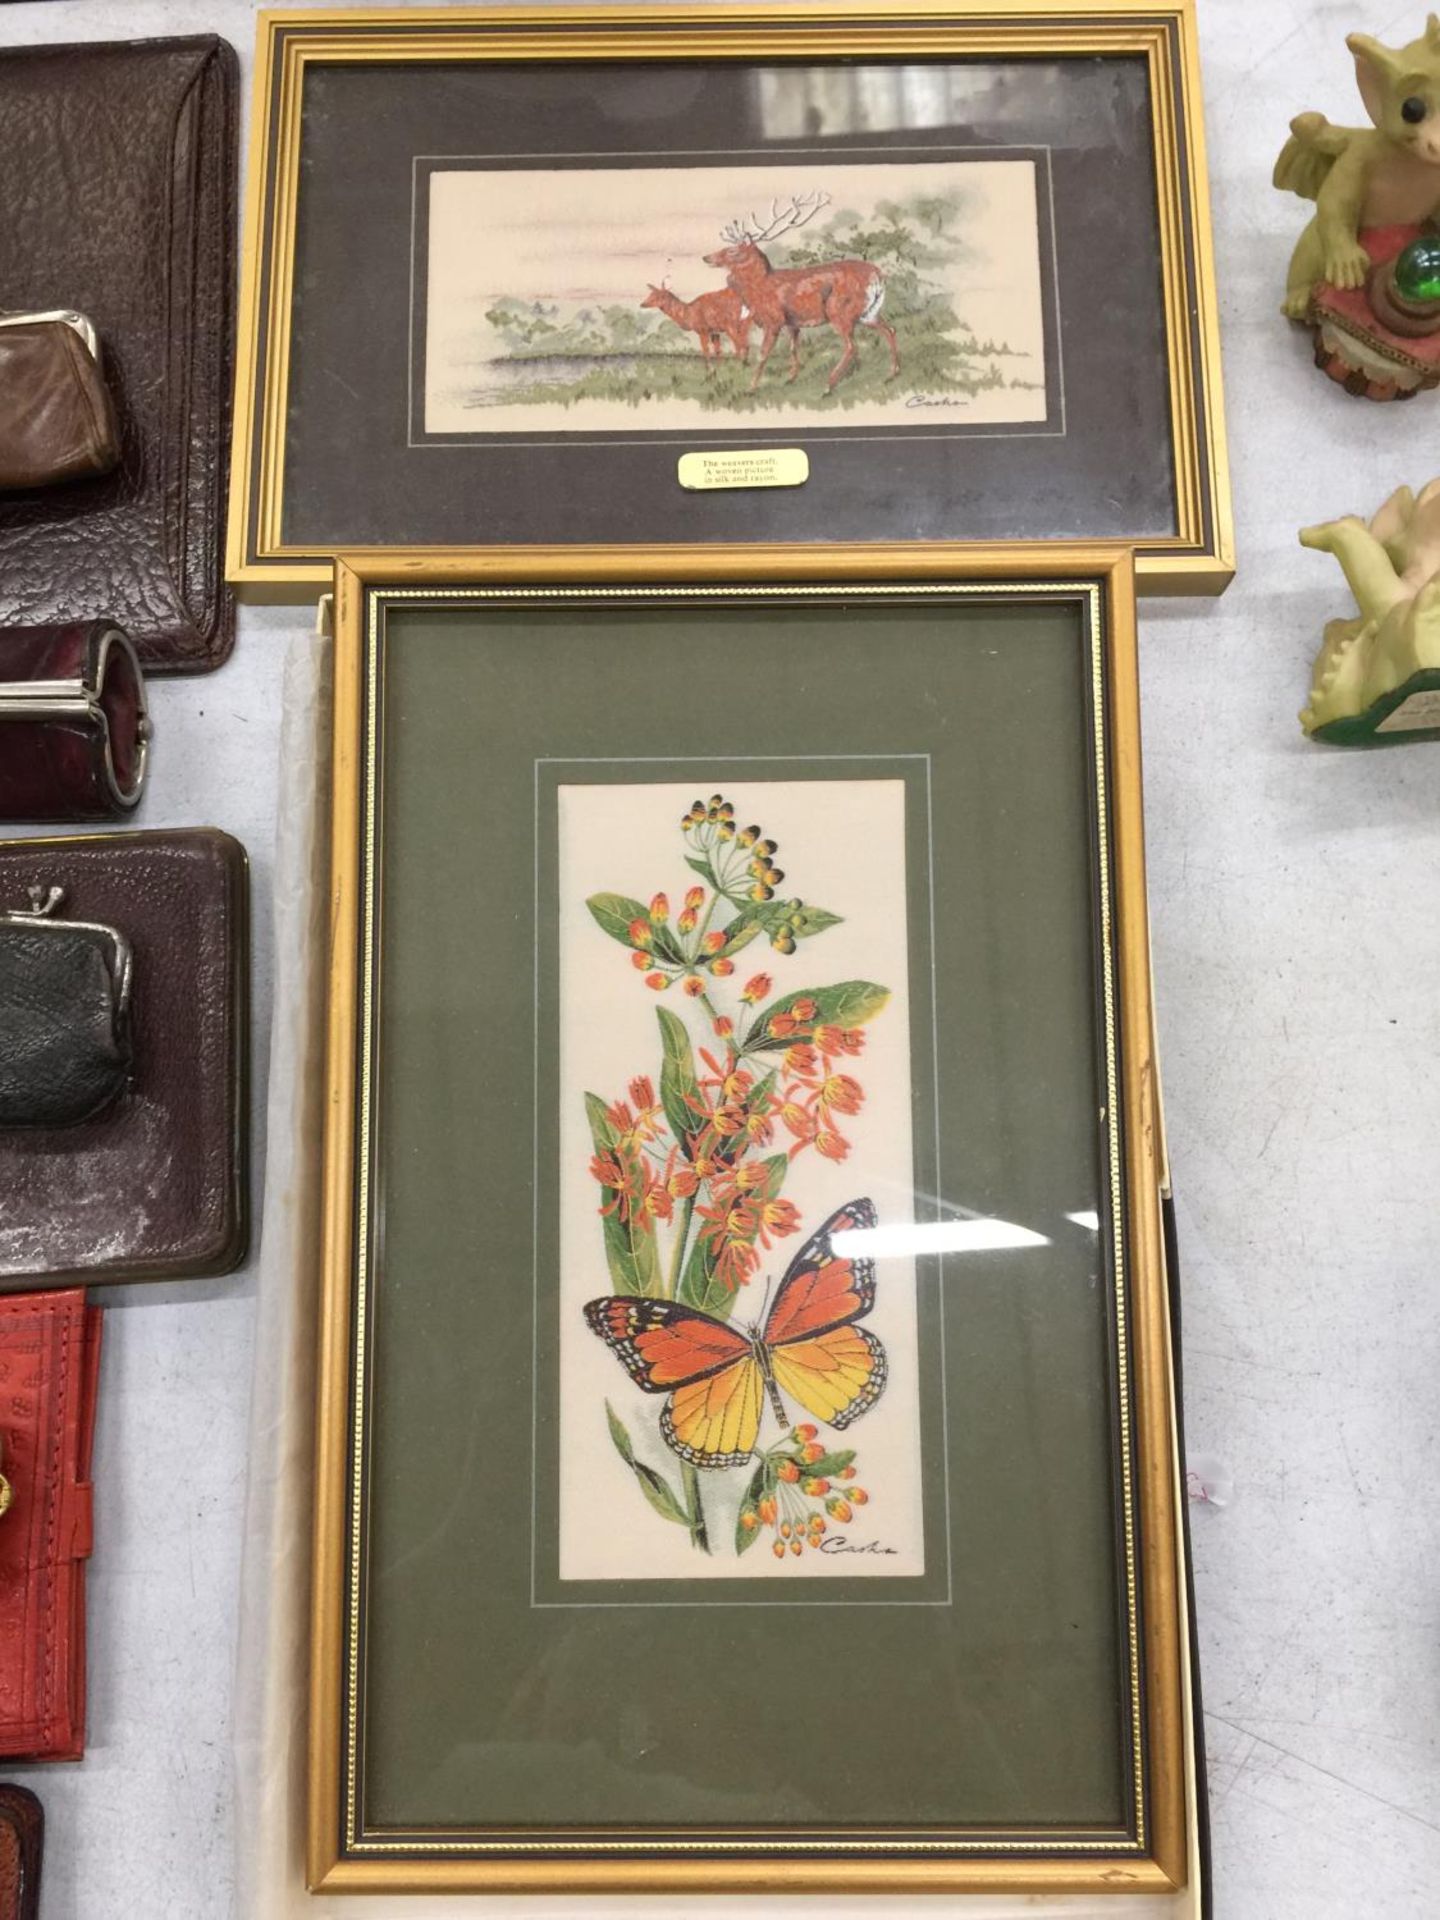 A CASH'S WOVEN PICTURE OF A BUTTERFLY AND RED DEER